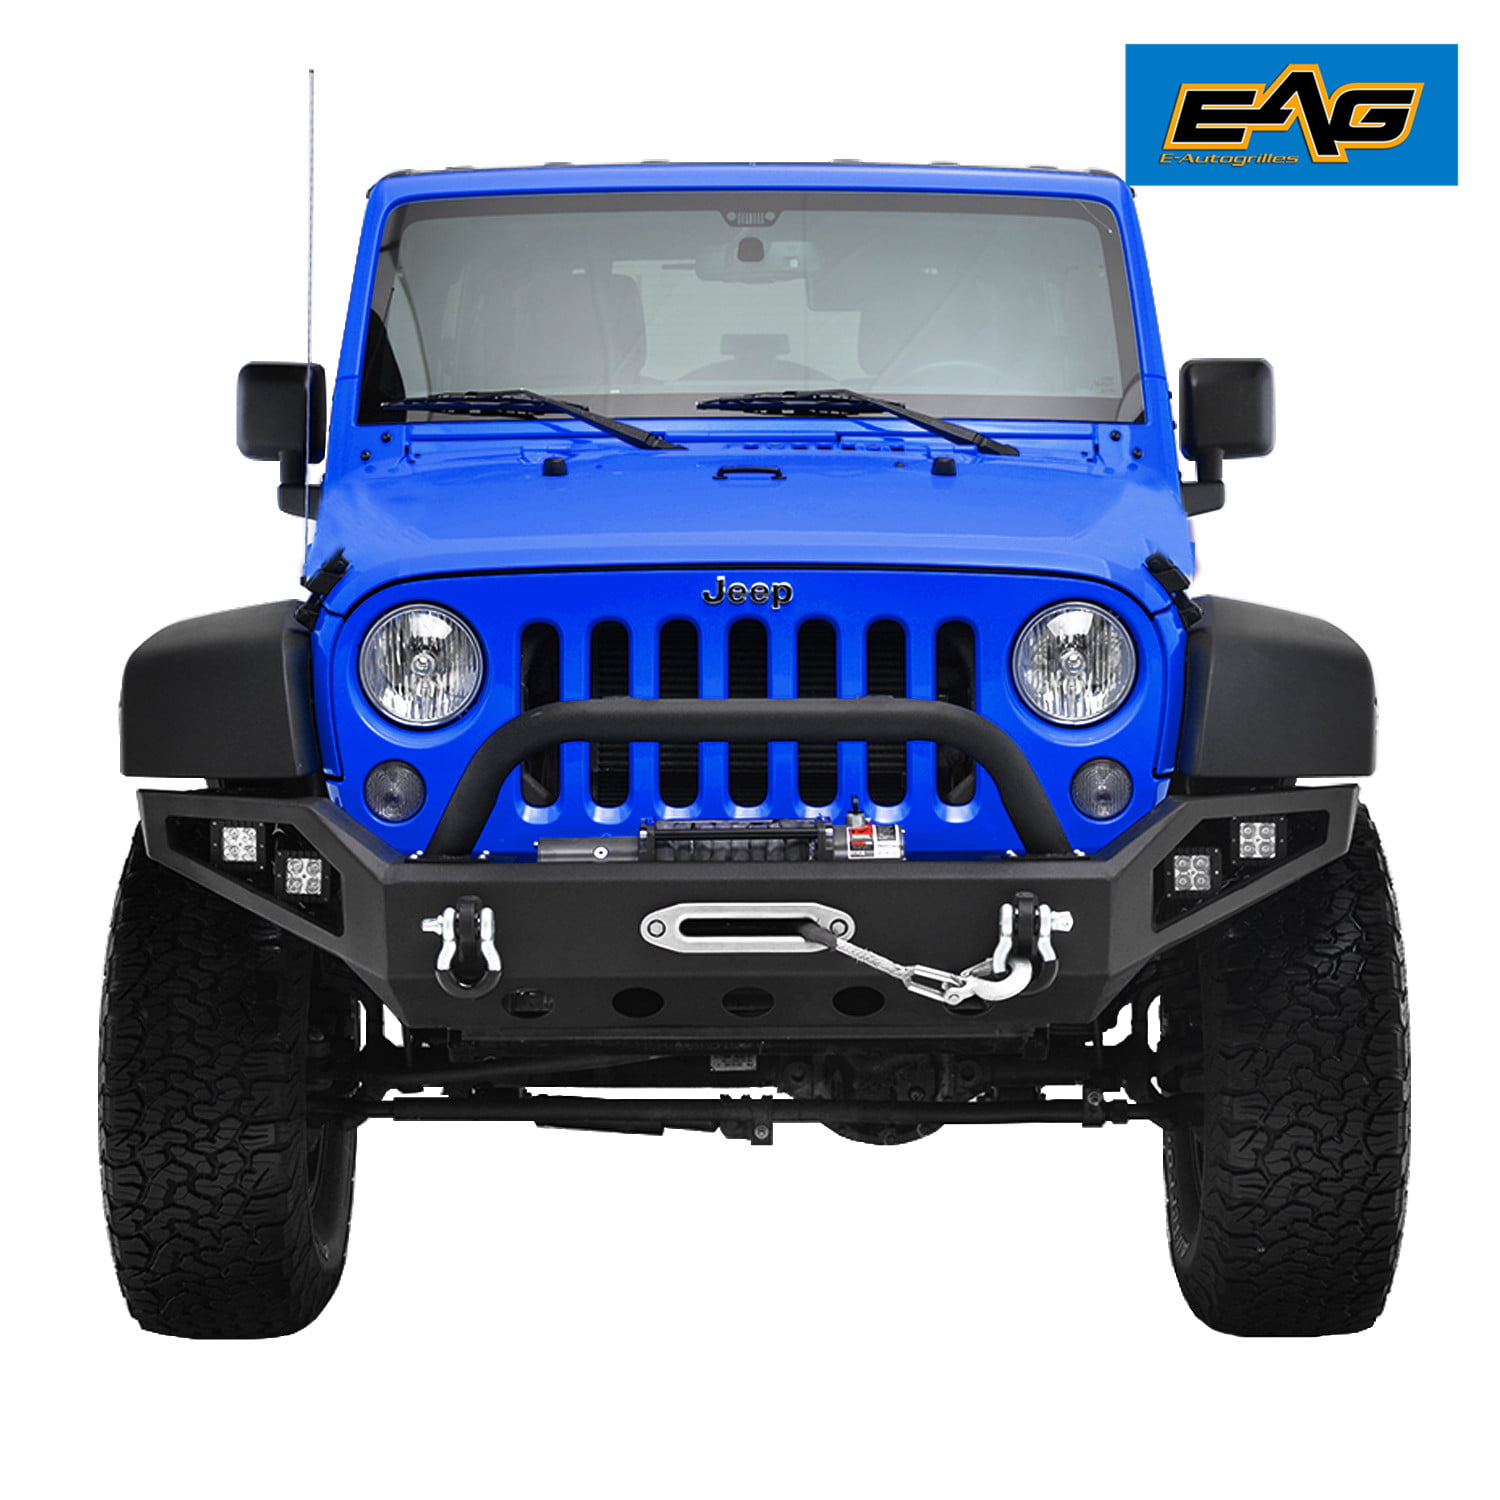 EAG Front Bumper with Winch Plate and D-rings Fit for 07-18 Wrangler JK Offroad 